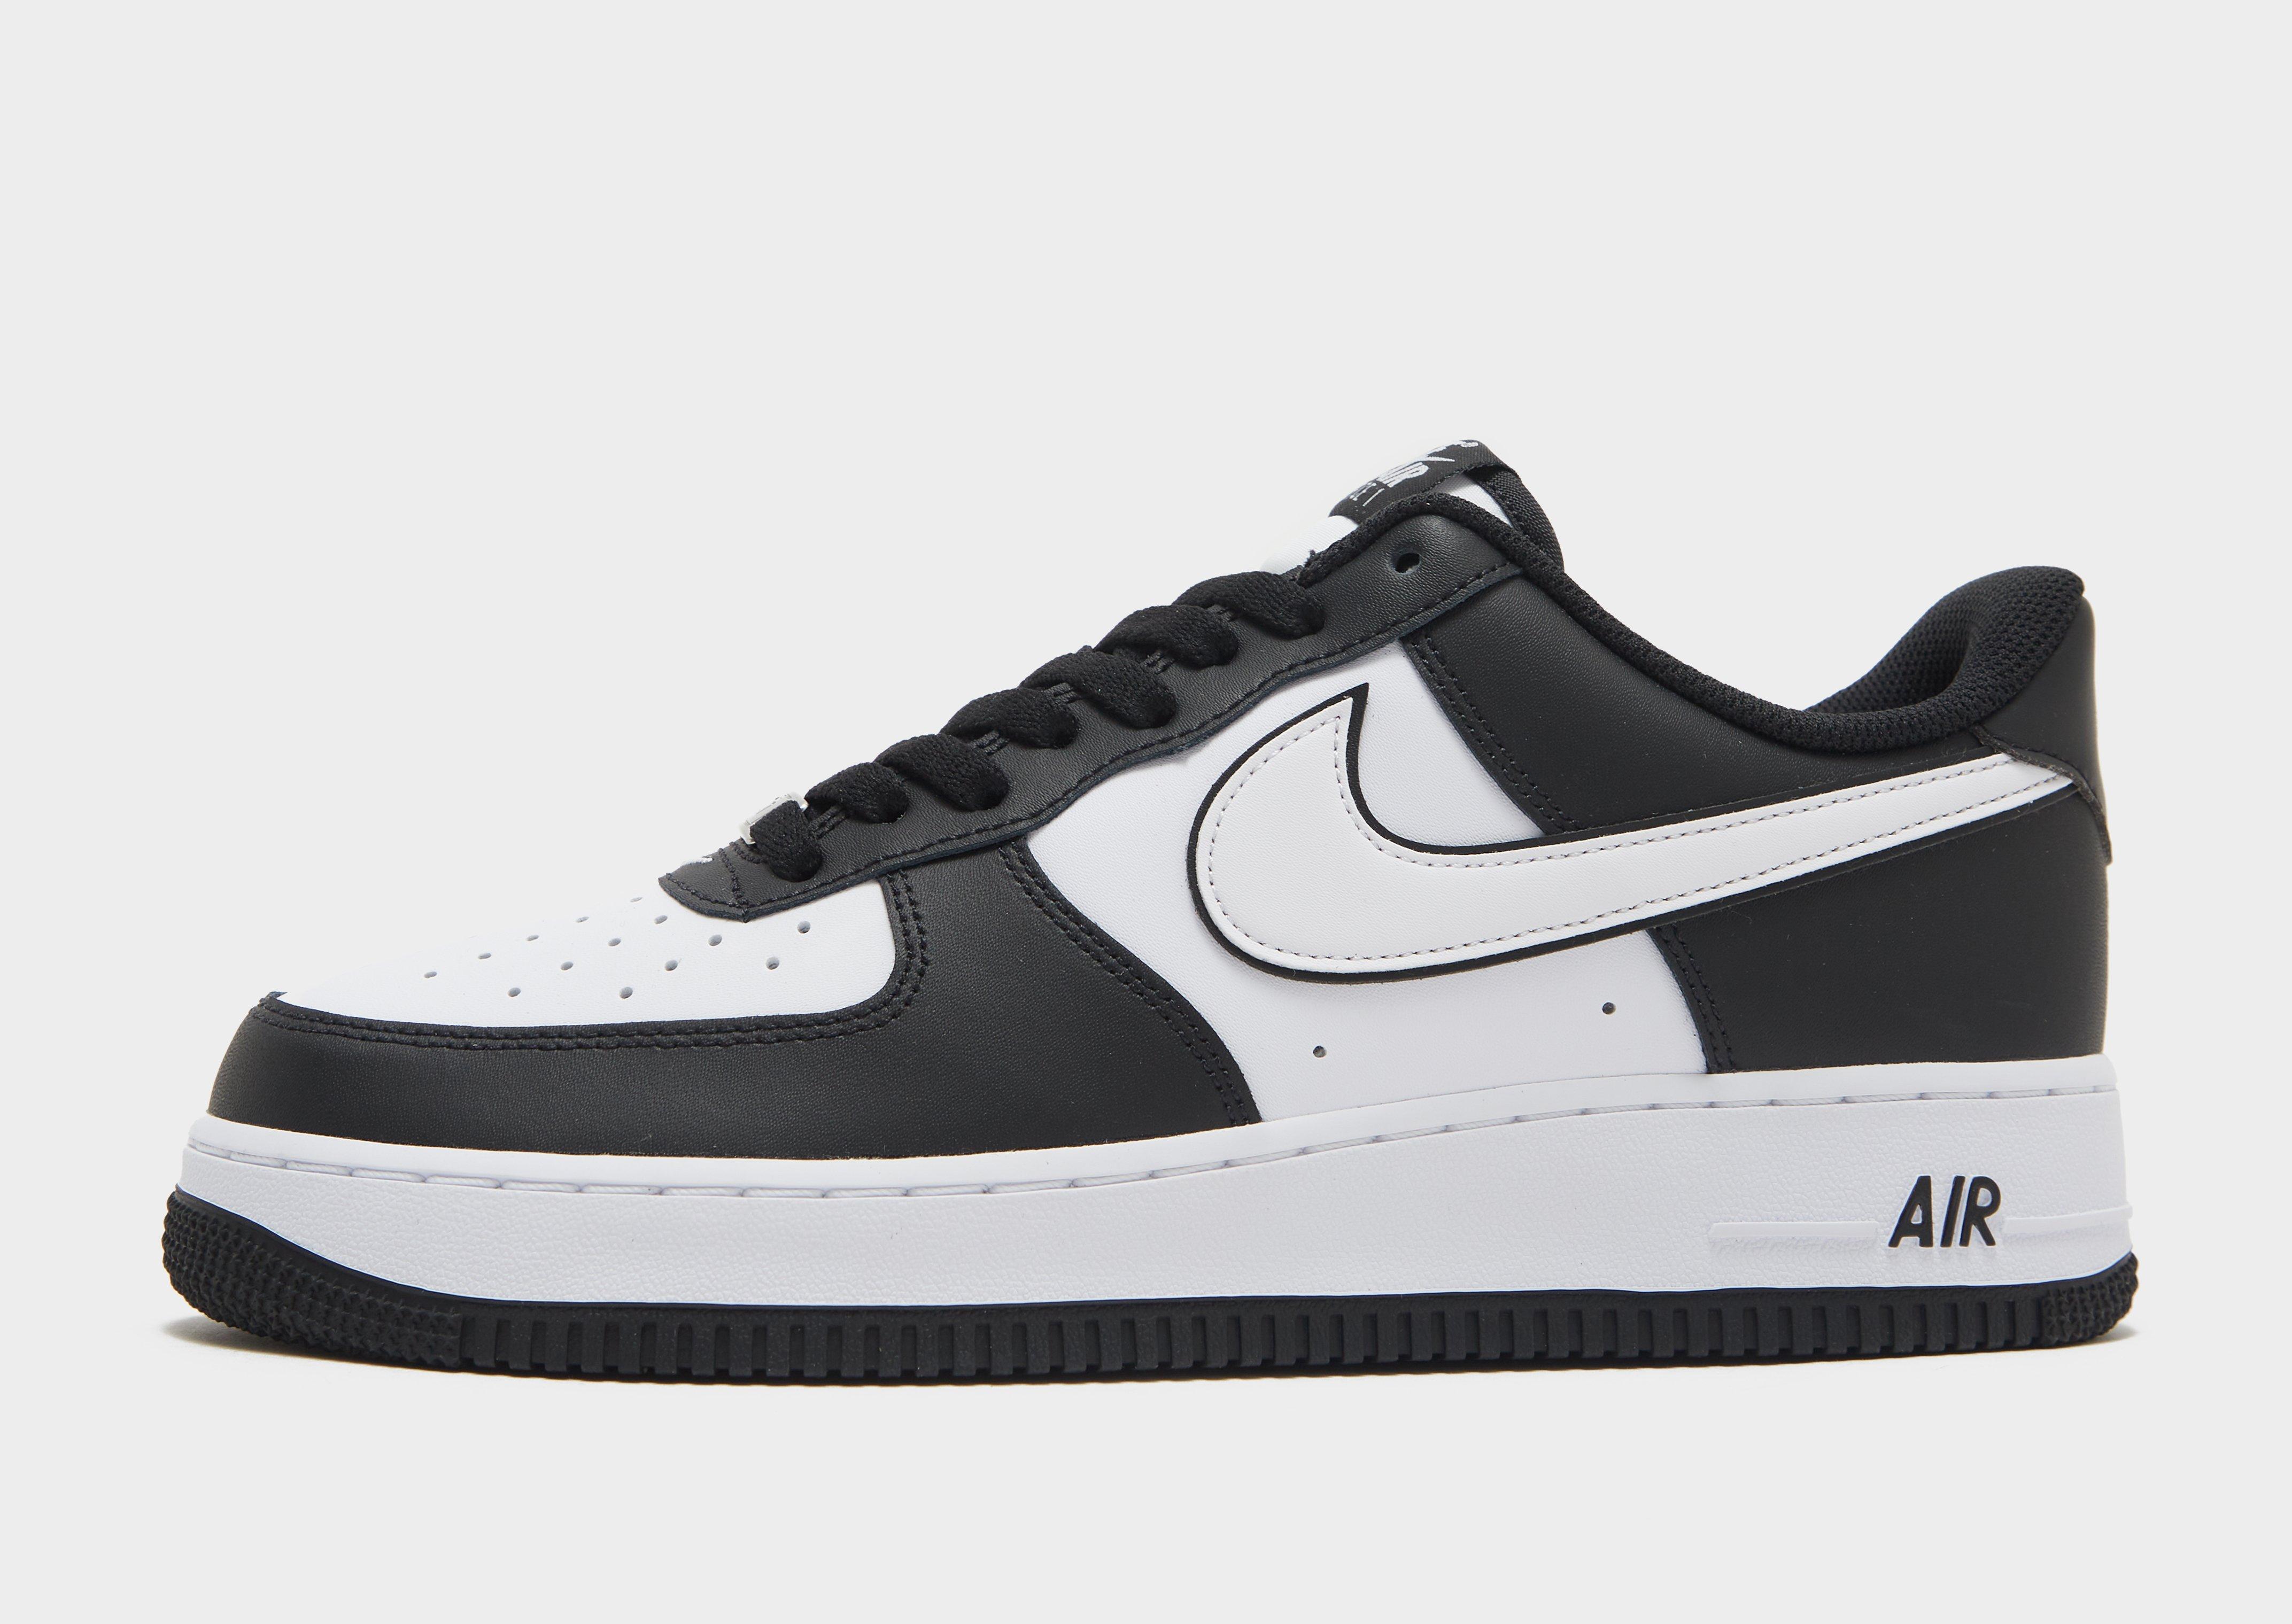 Nike Air Force 1 Low Junior - Black - Trainers - Size: 5